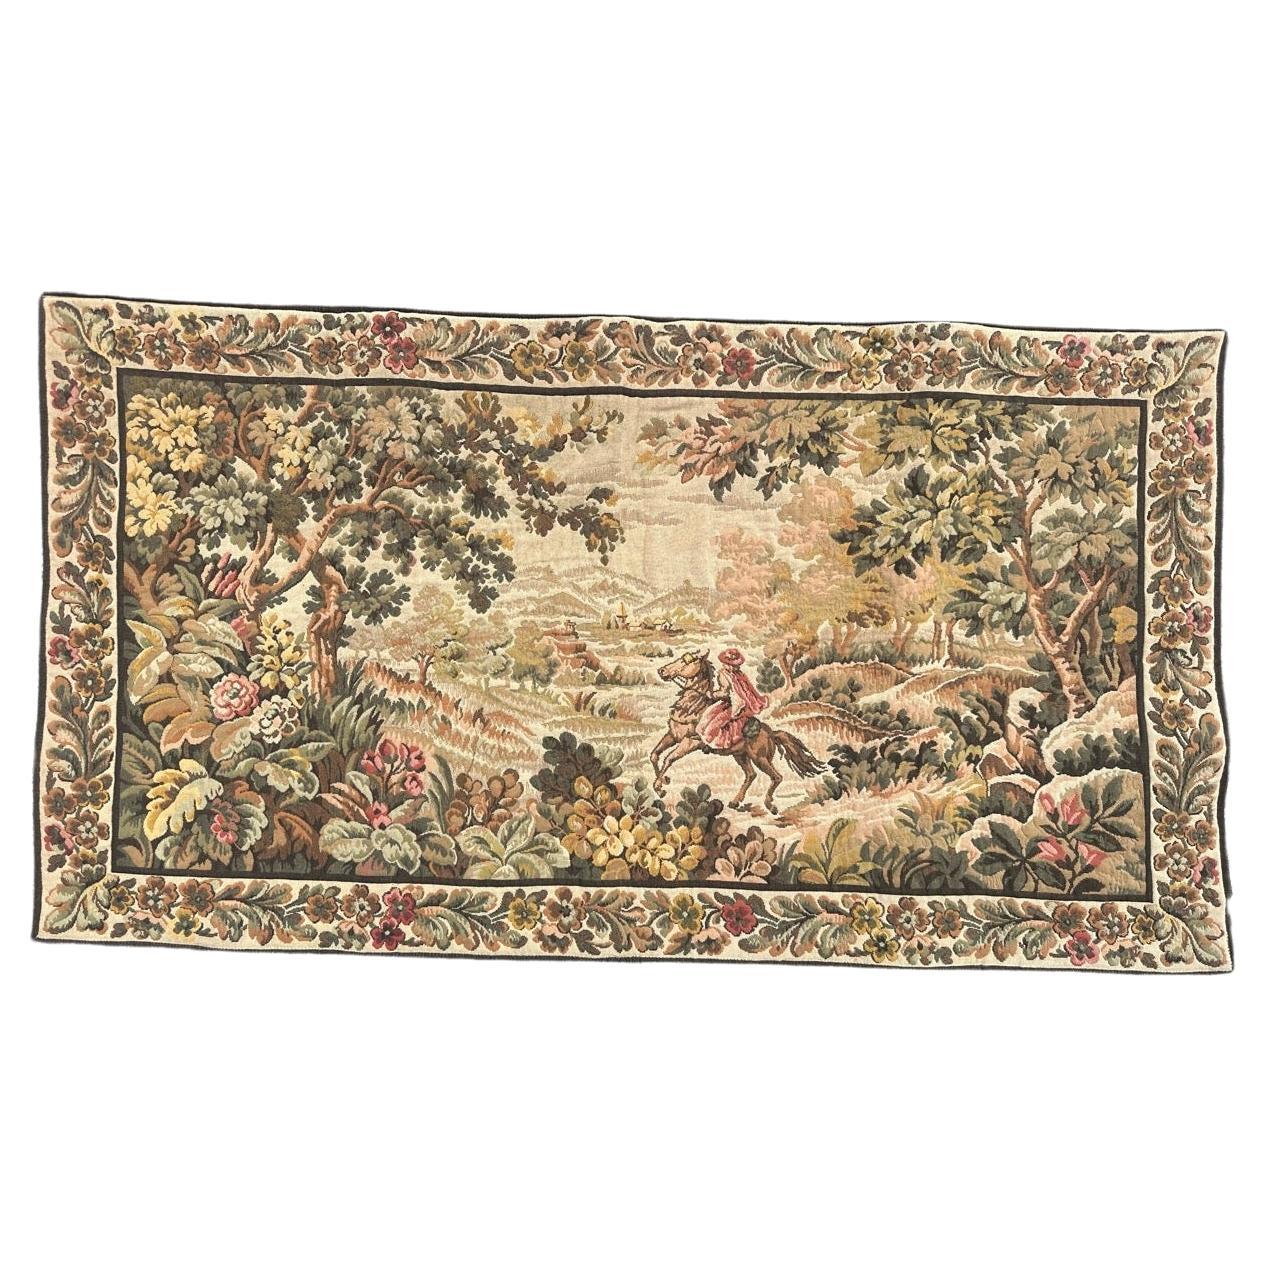 Bobyrug's Nice French Aubusson Style Jacquard Tapisserie 